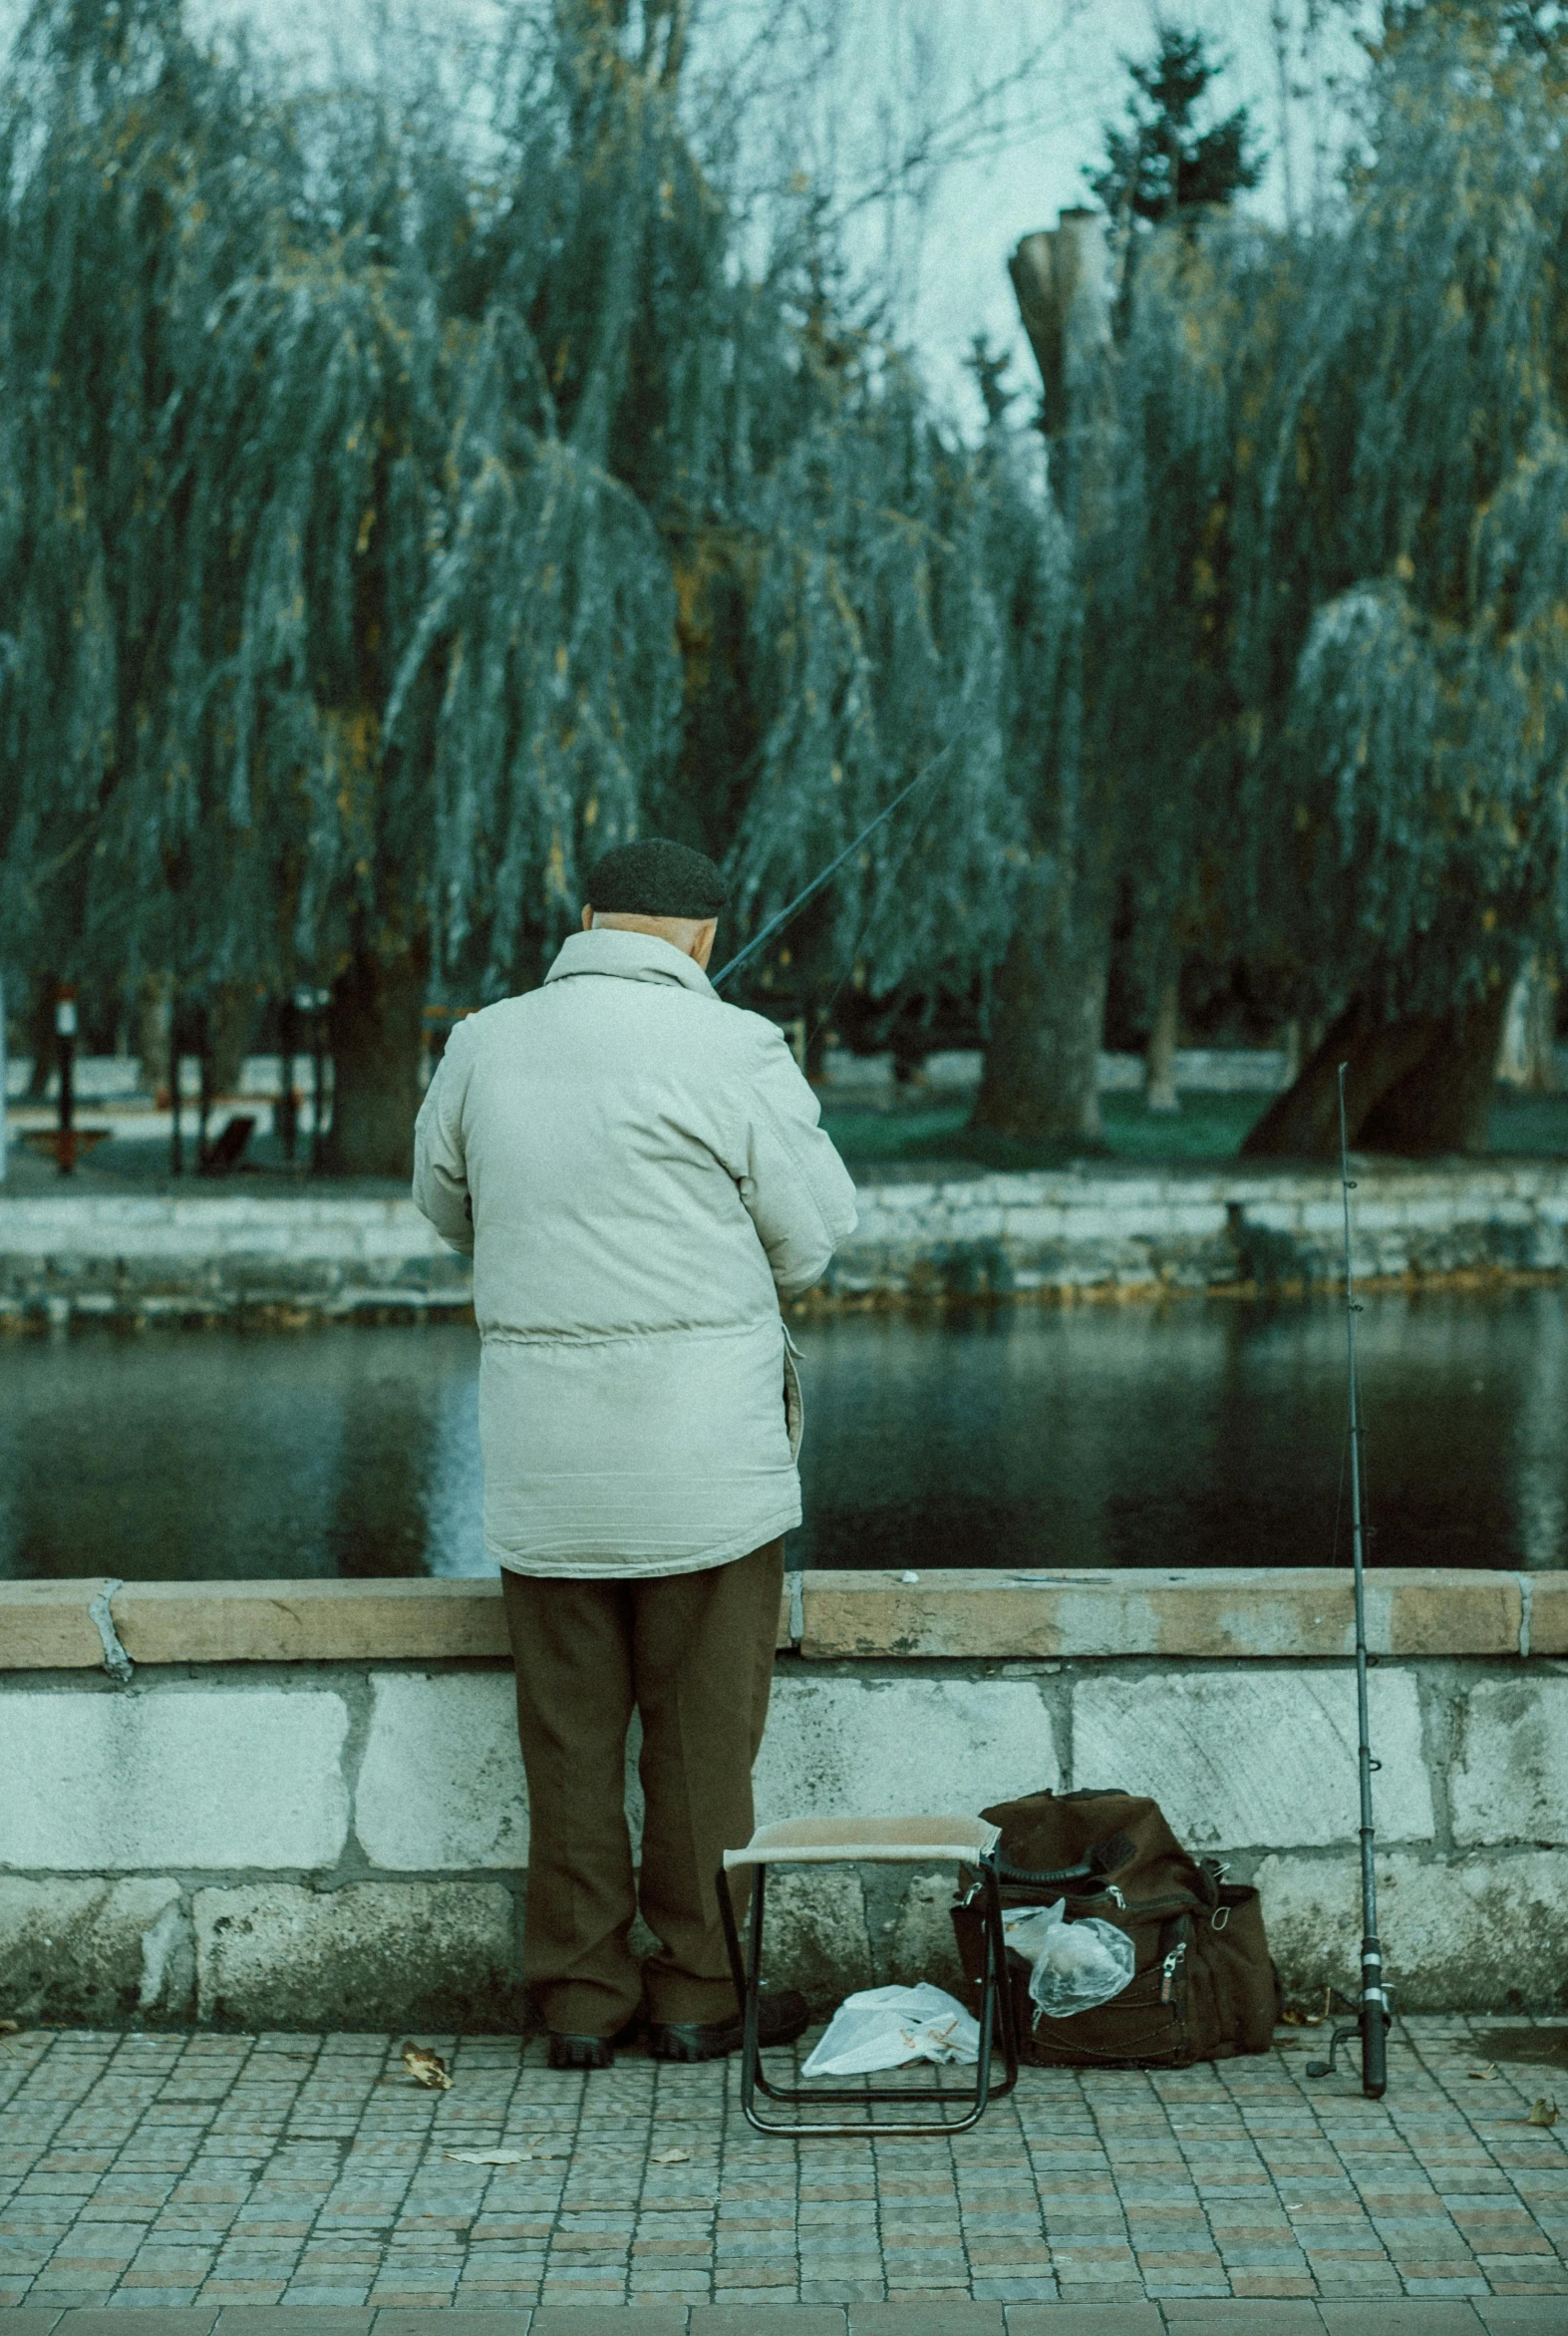 a man sitting on a bench next to a body of water, fishing, standing next to water, looking old, at a park